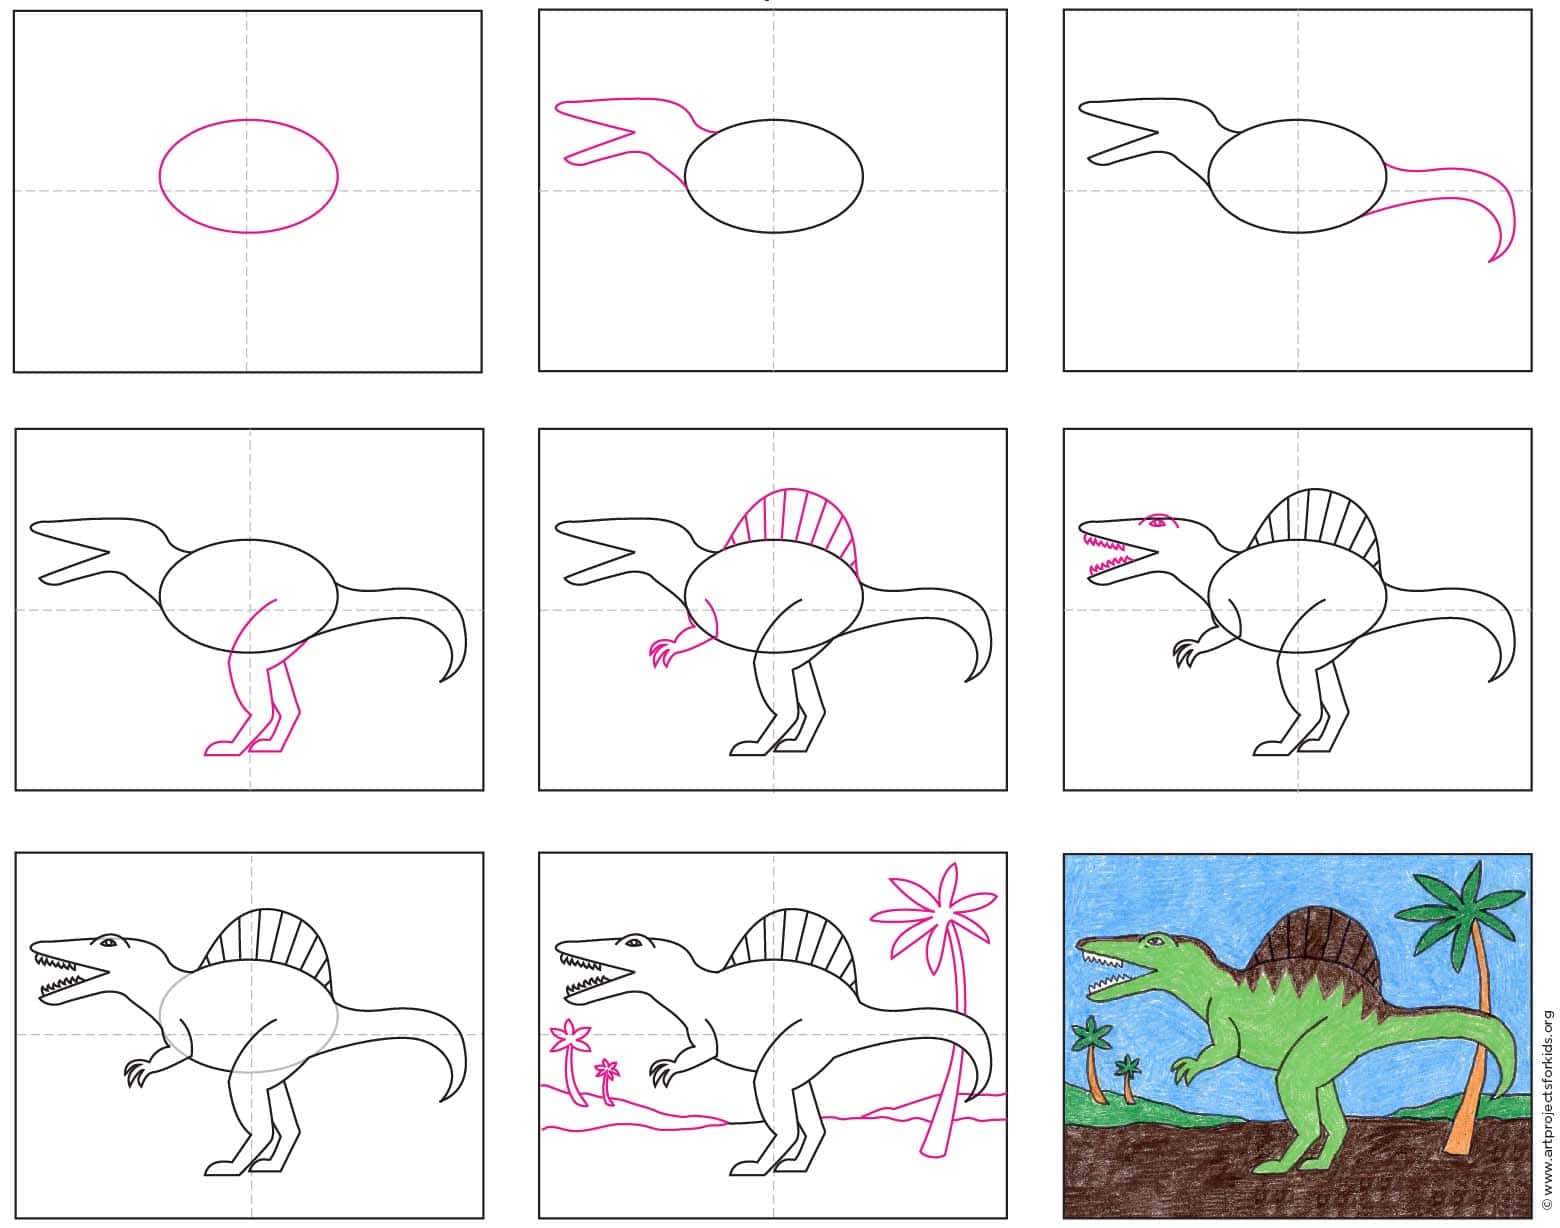 Easy How to Draw Spinosaurus Tutorial and Spinosaurus Coloring Page